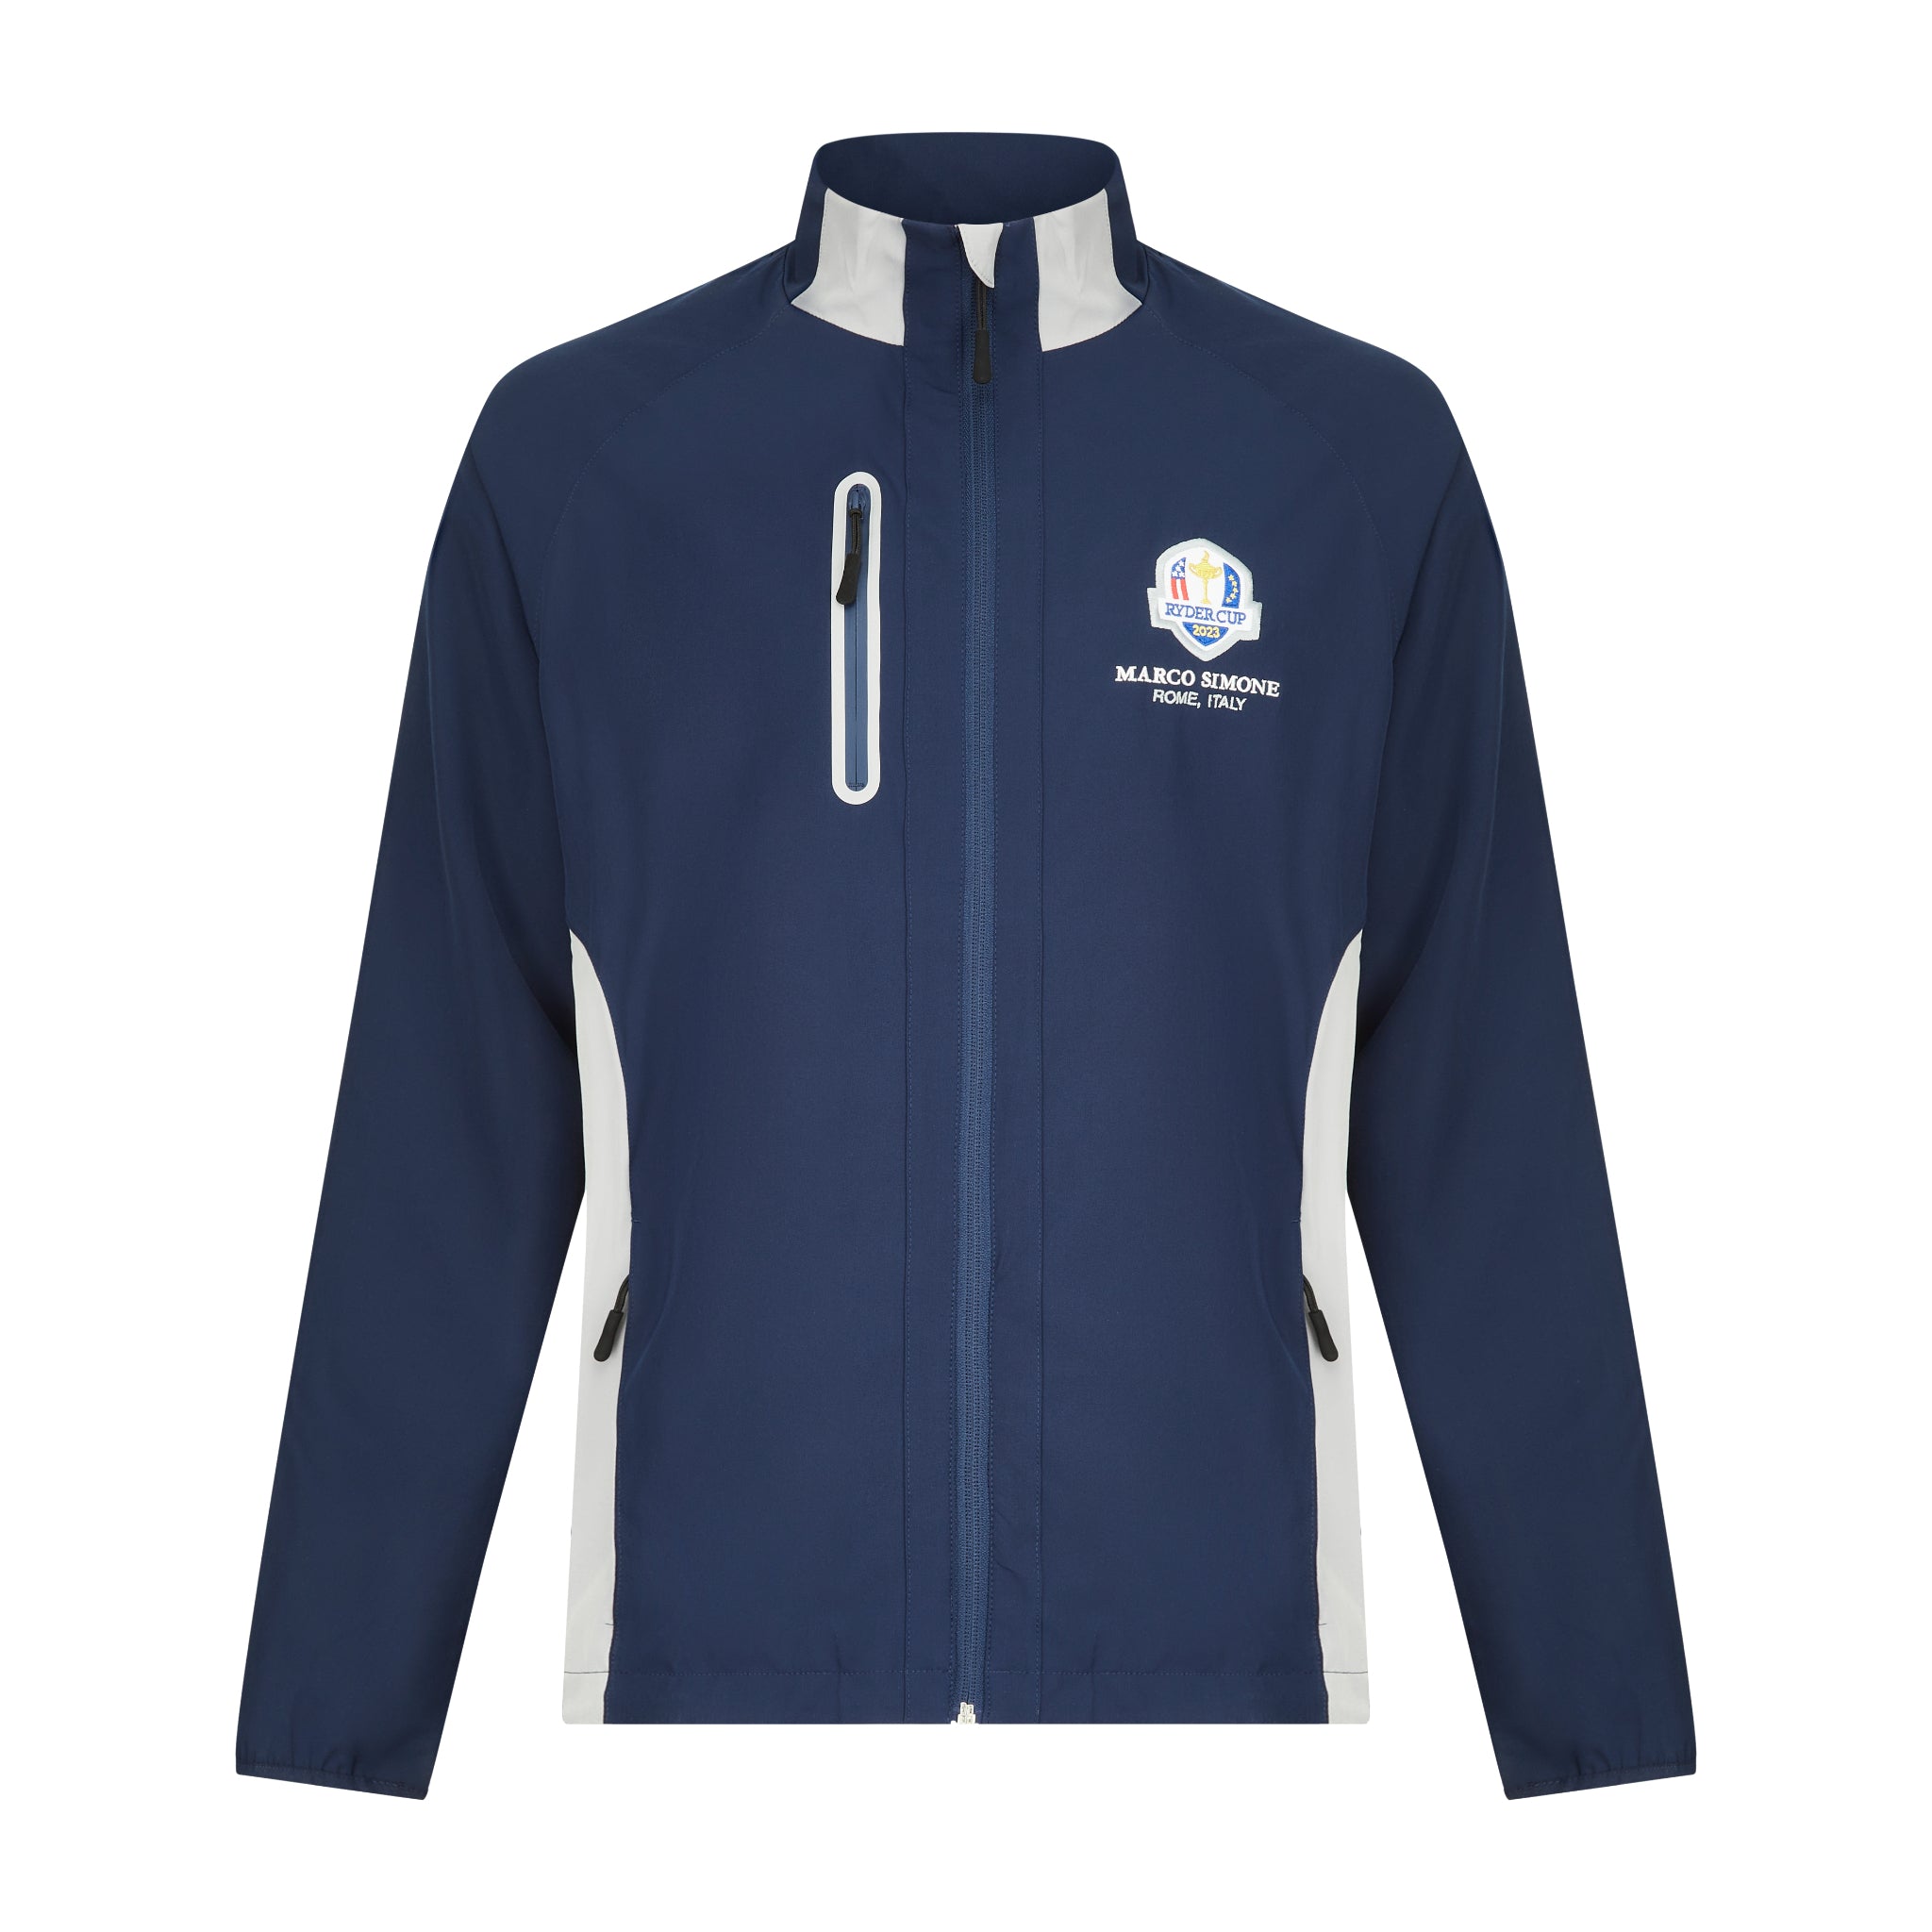 2023 Ryder Cup Men's Navy Long Sleeve Wind Top - The Official European ...